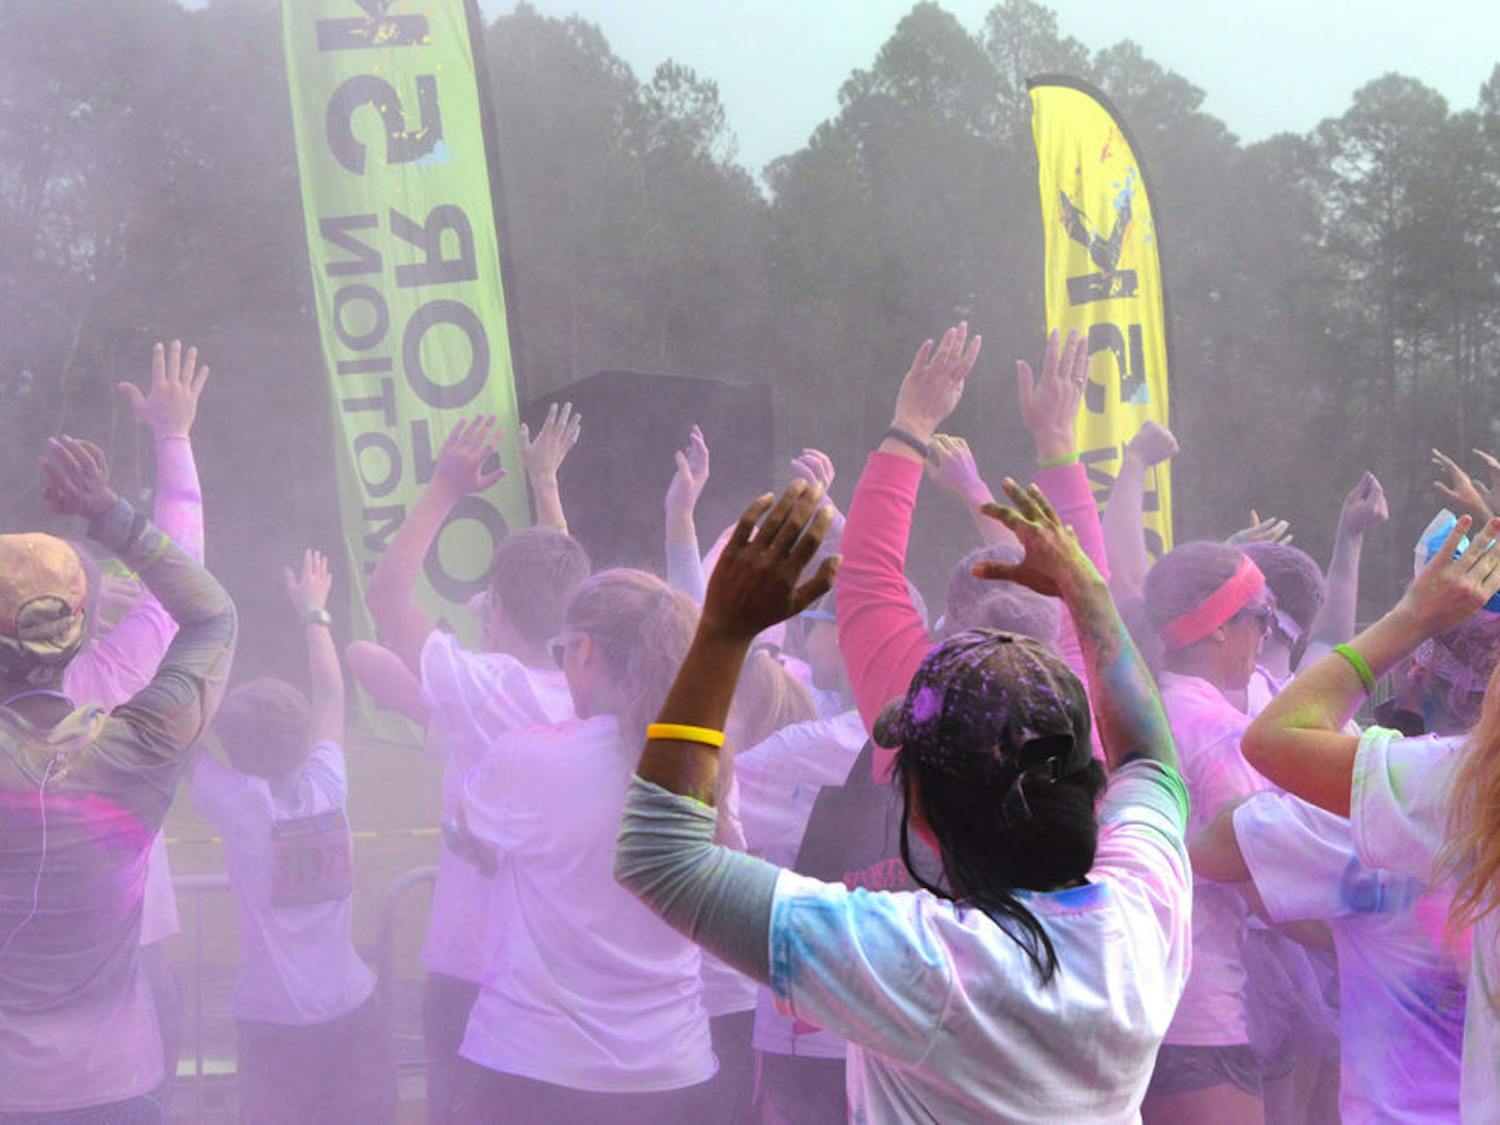 Runners dance to music performed by DJ James Phabulous at the end of 5K. About 500 people participated in the color run at the Alachua County Fairgrounds on Jan. 16, 2016.